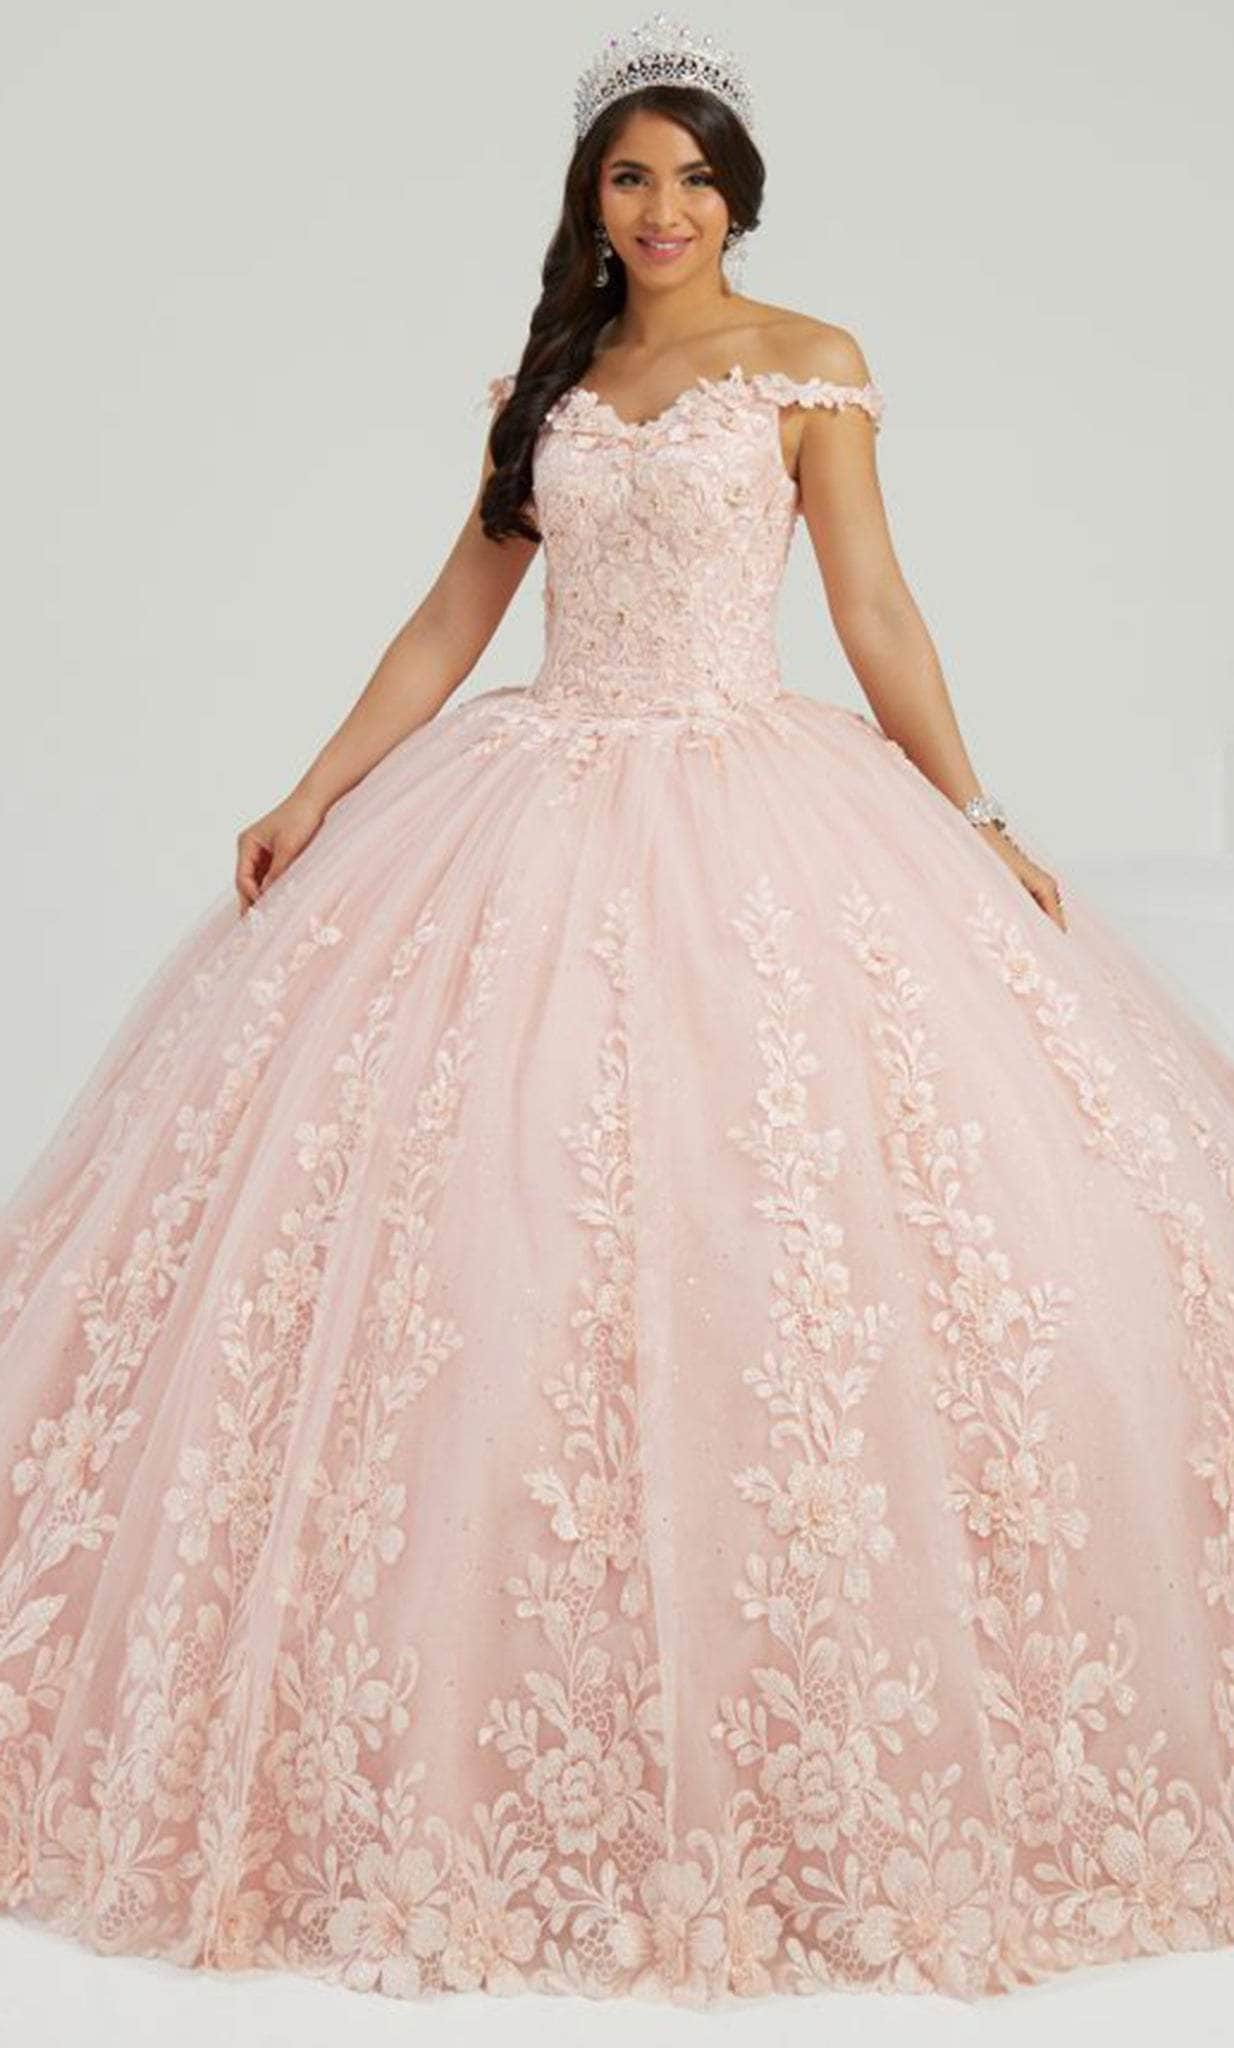 Image of Fiesta Gowns 56484 - Embroidery Floral Ball Gown